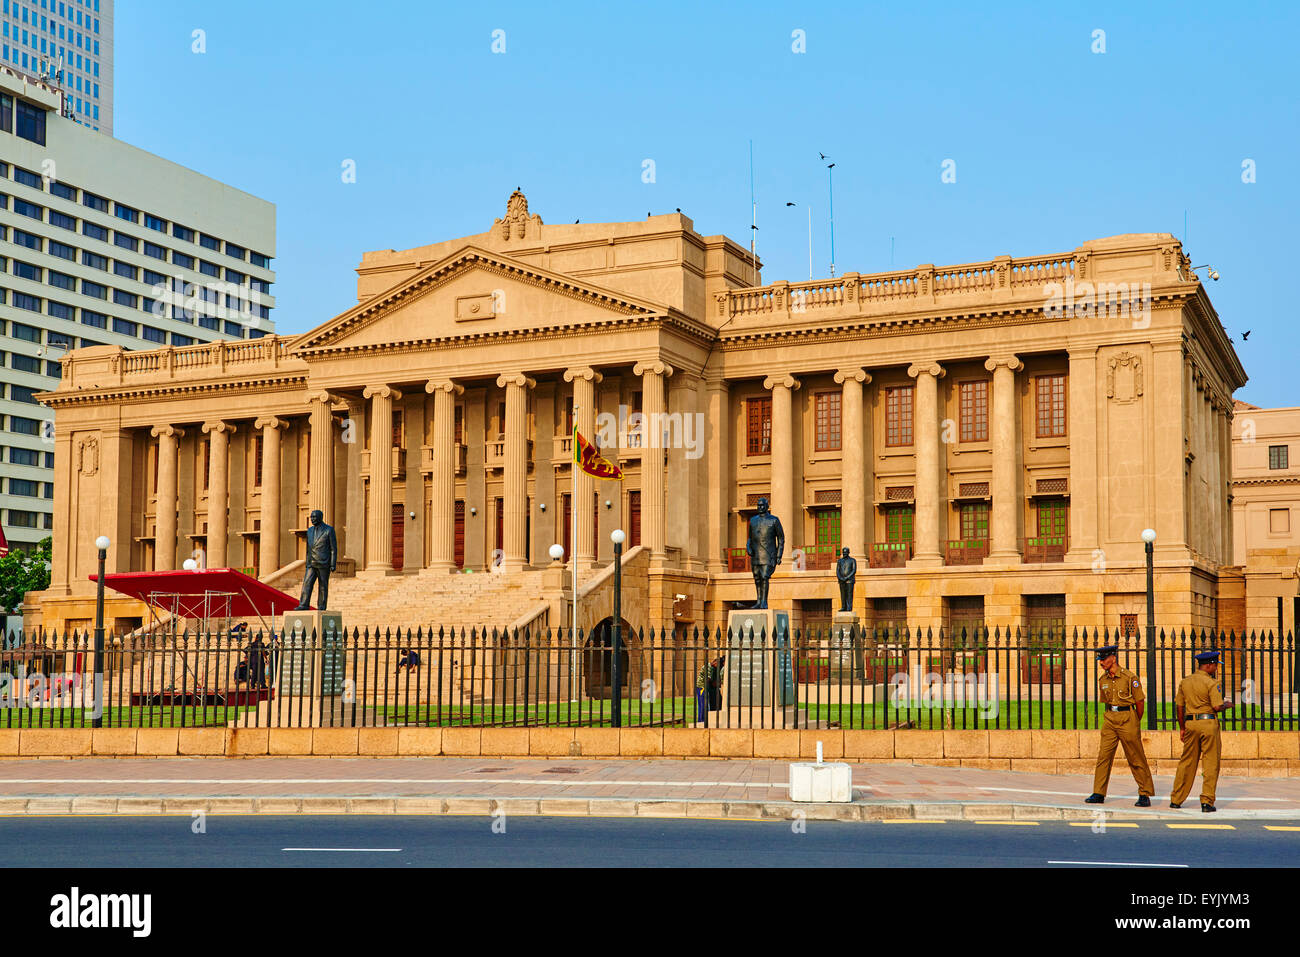 Sri Lanka, Colombo, Old city, Fort, Ancient Parliament Building Stock Photo